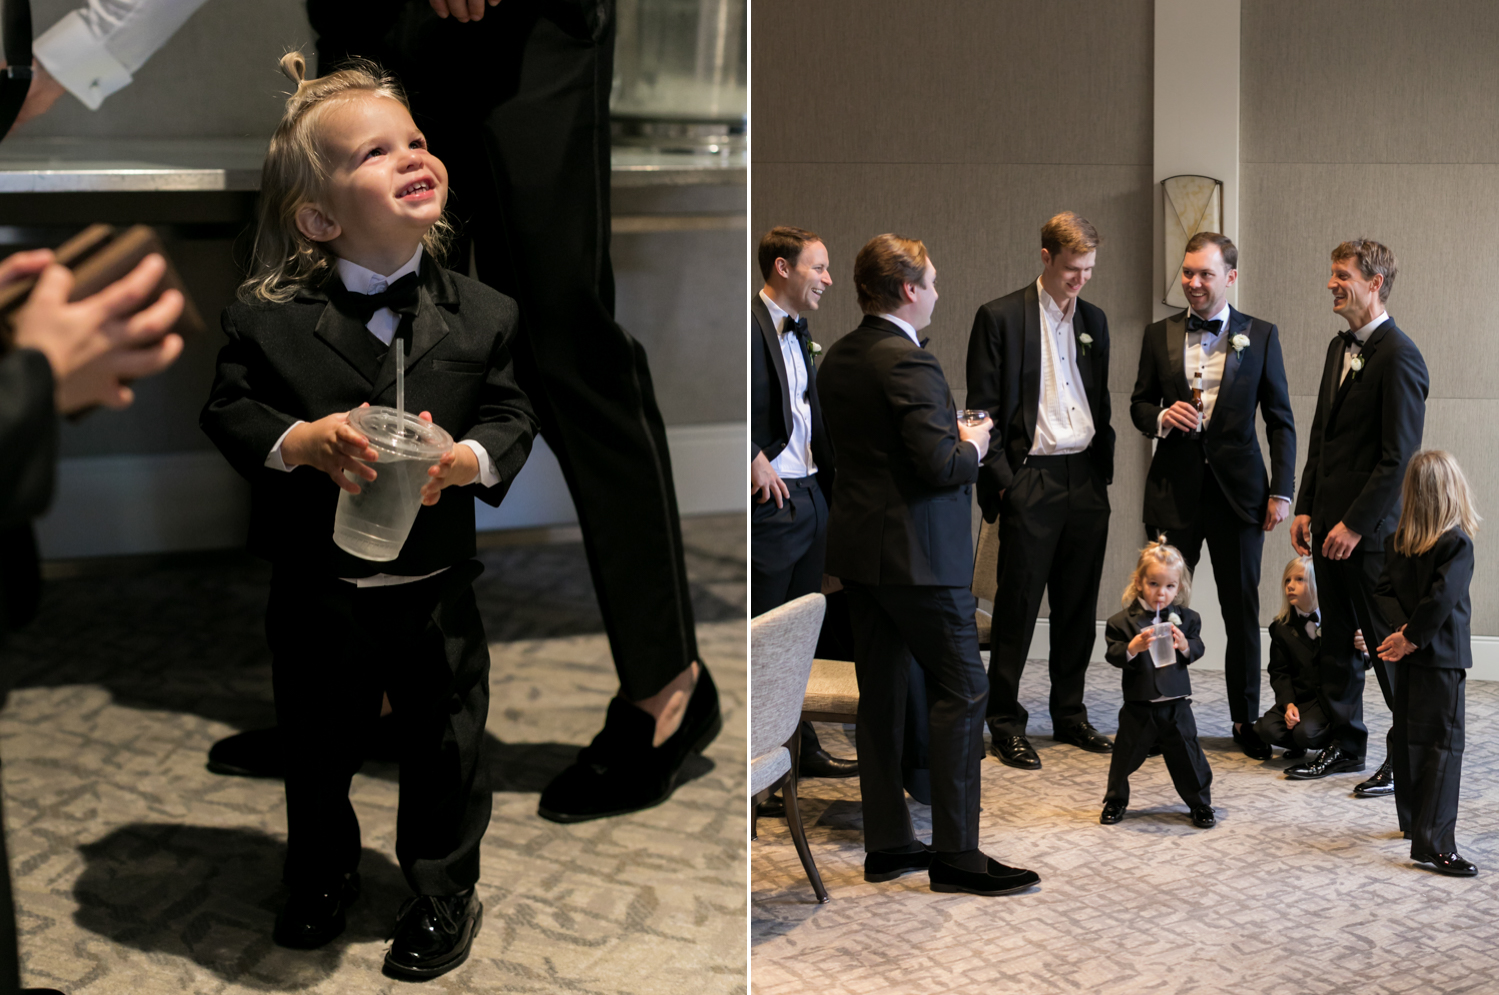 A little boy stands in the middle of all the grown groomsmen and laughs, happy to be a part of the action.